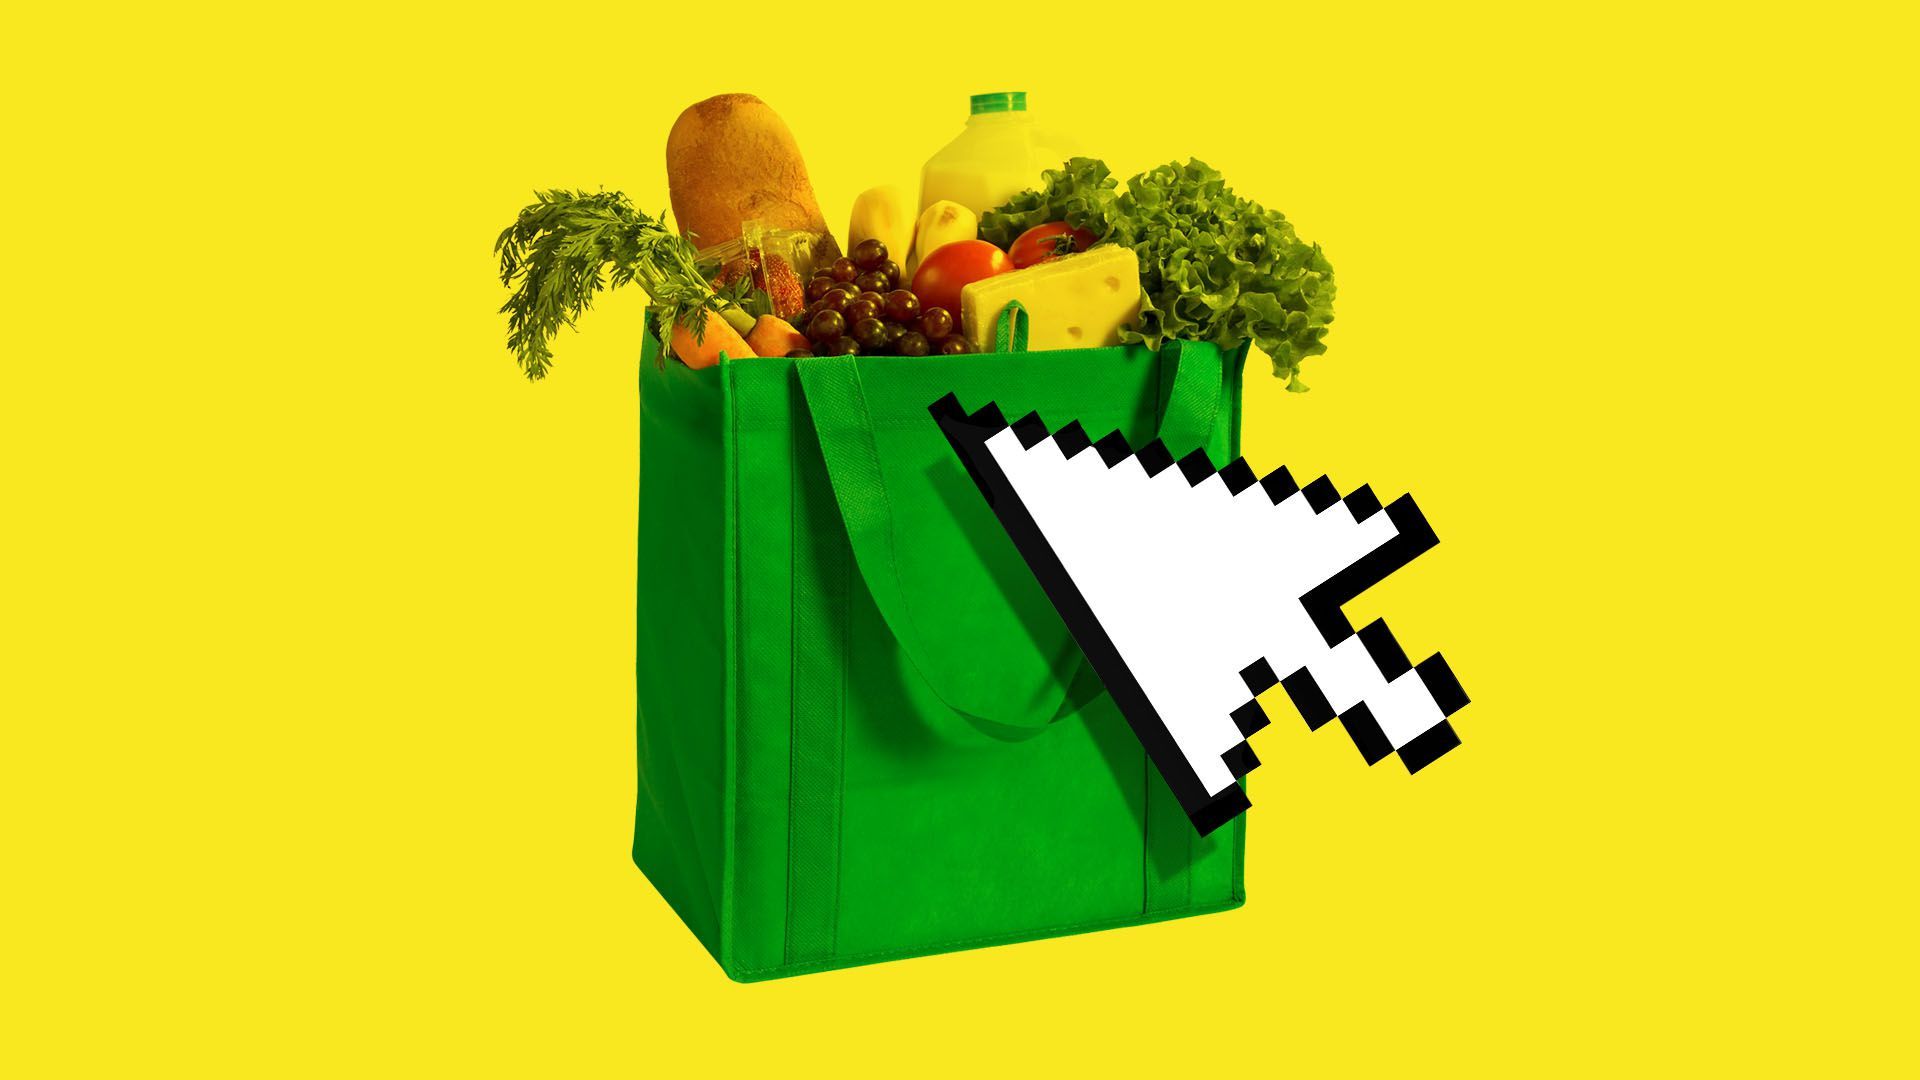 Illustration of a bag full of groceries with a cursor over it